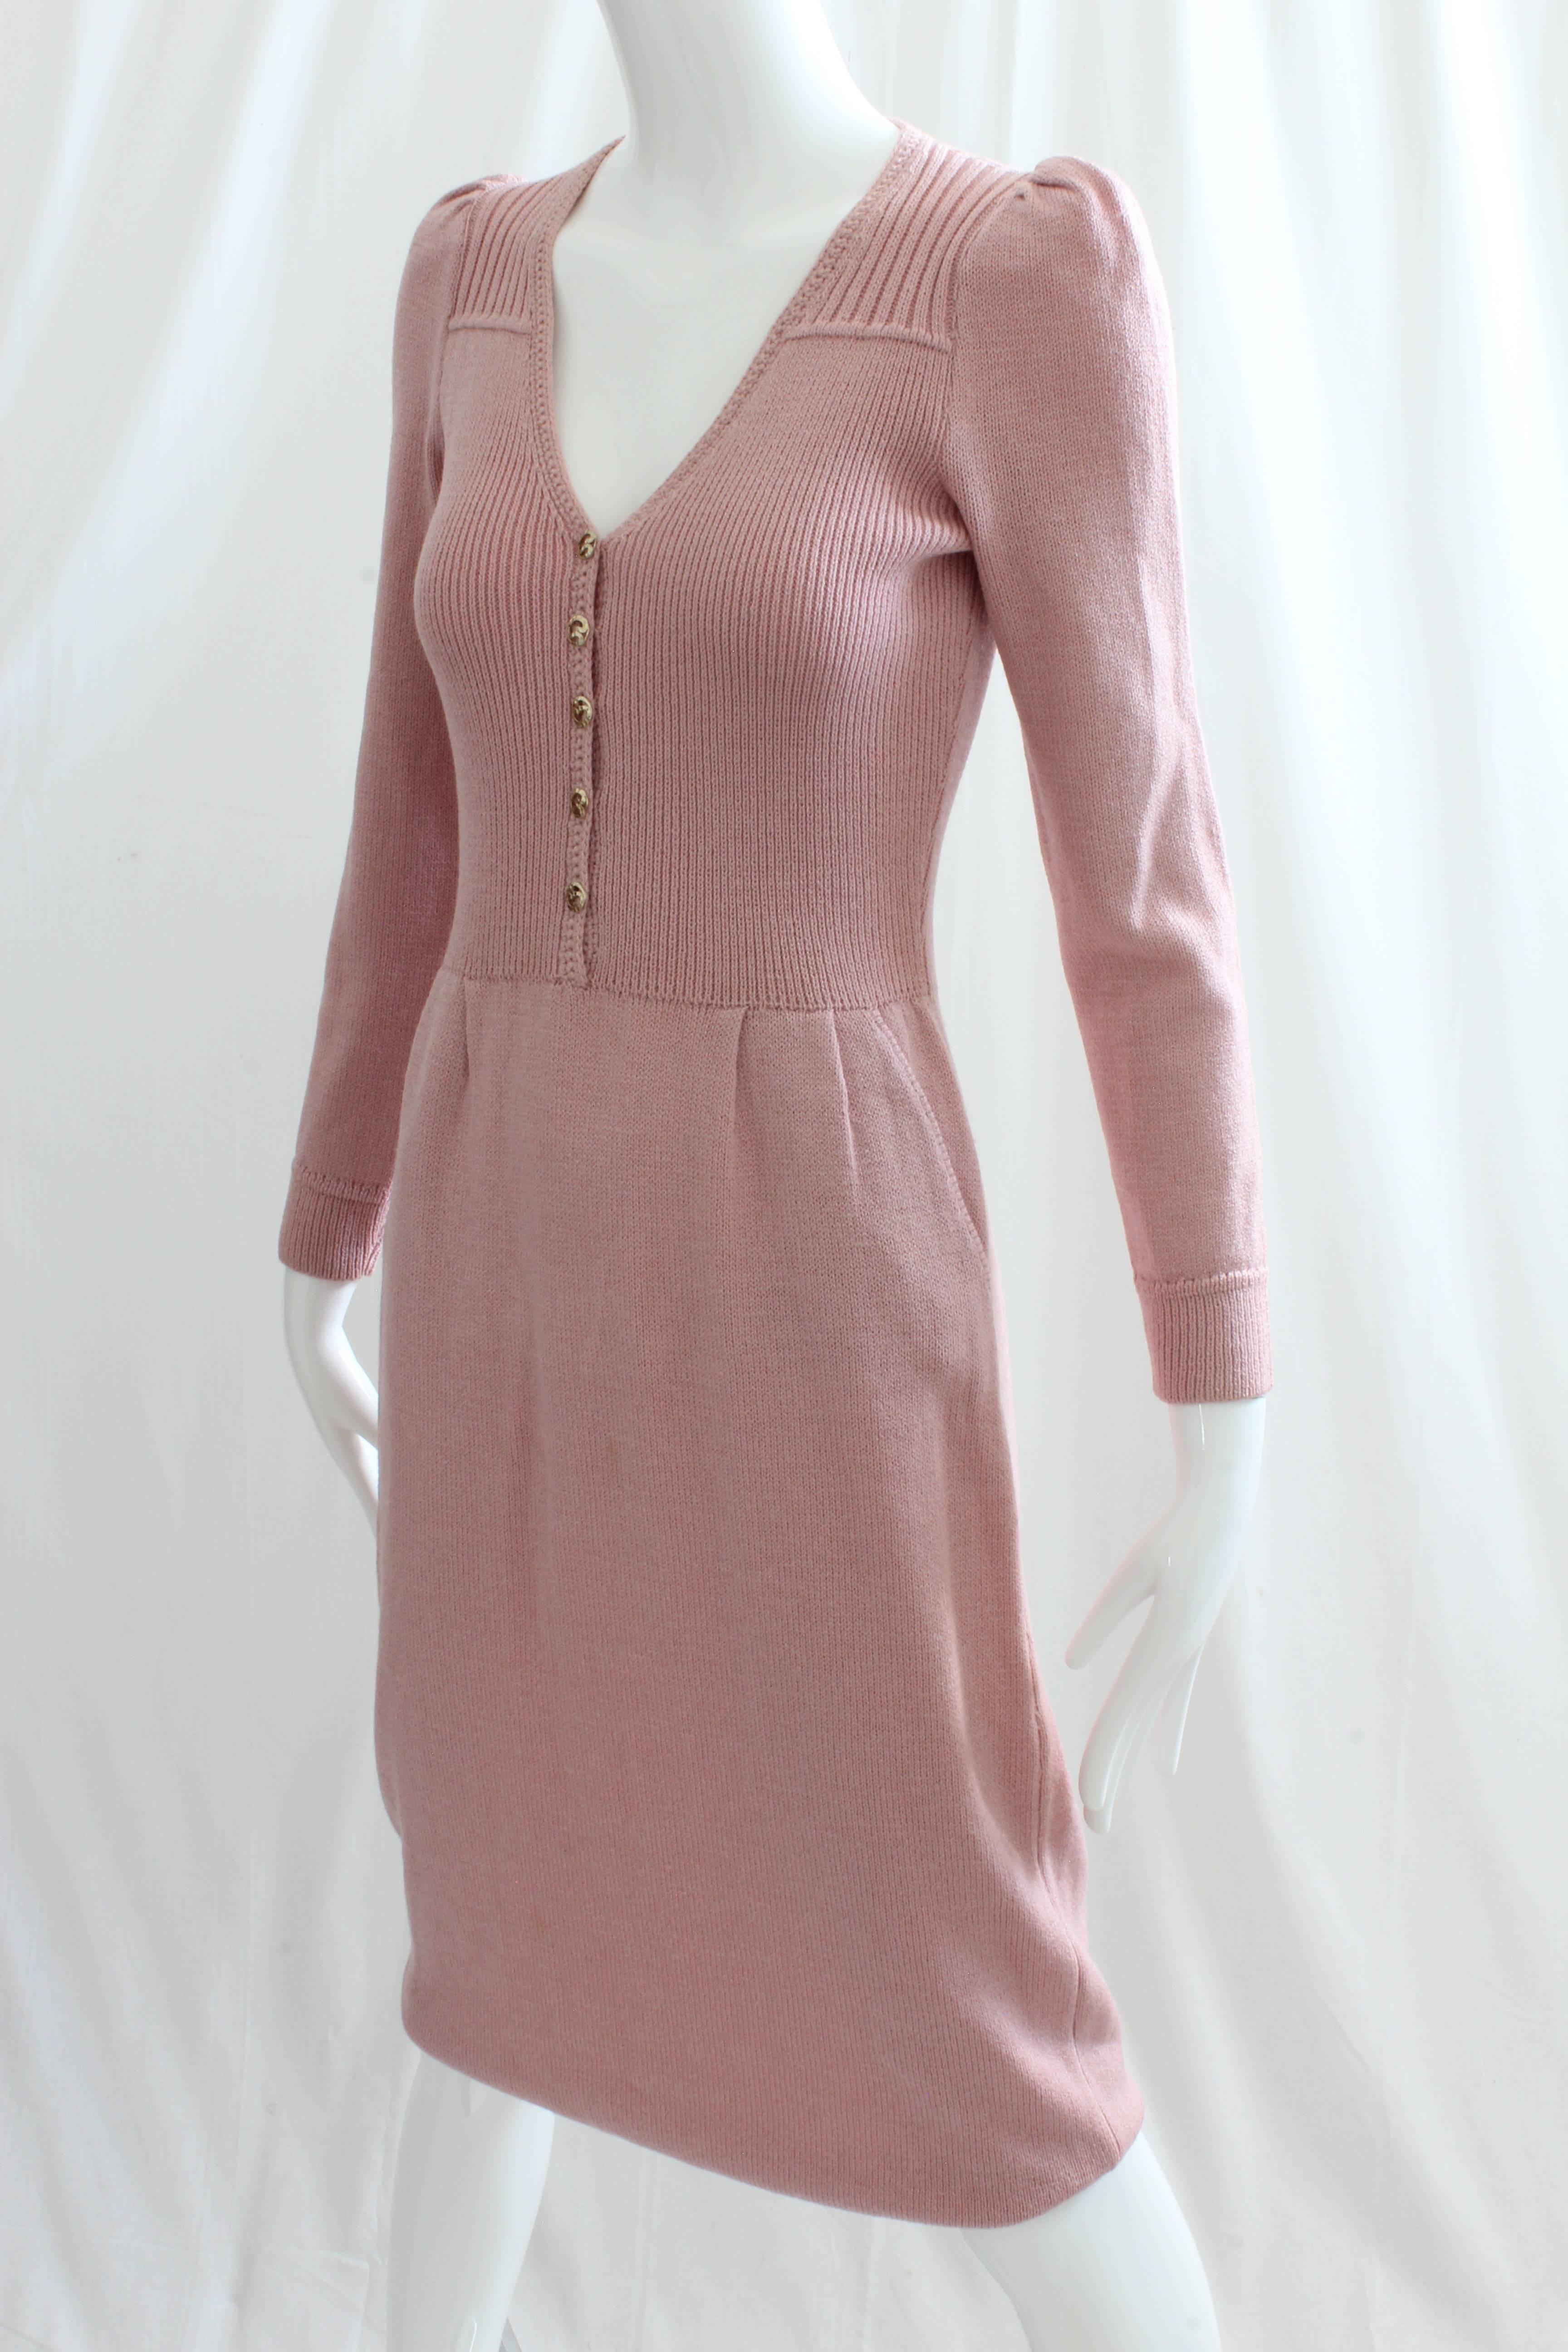 St John by Marie Gray Pink Knit Dress Vintage 70s Sz M In Good Condition In Port Saint Lucie, FL